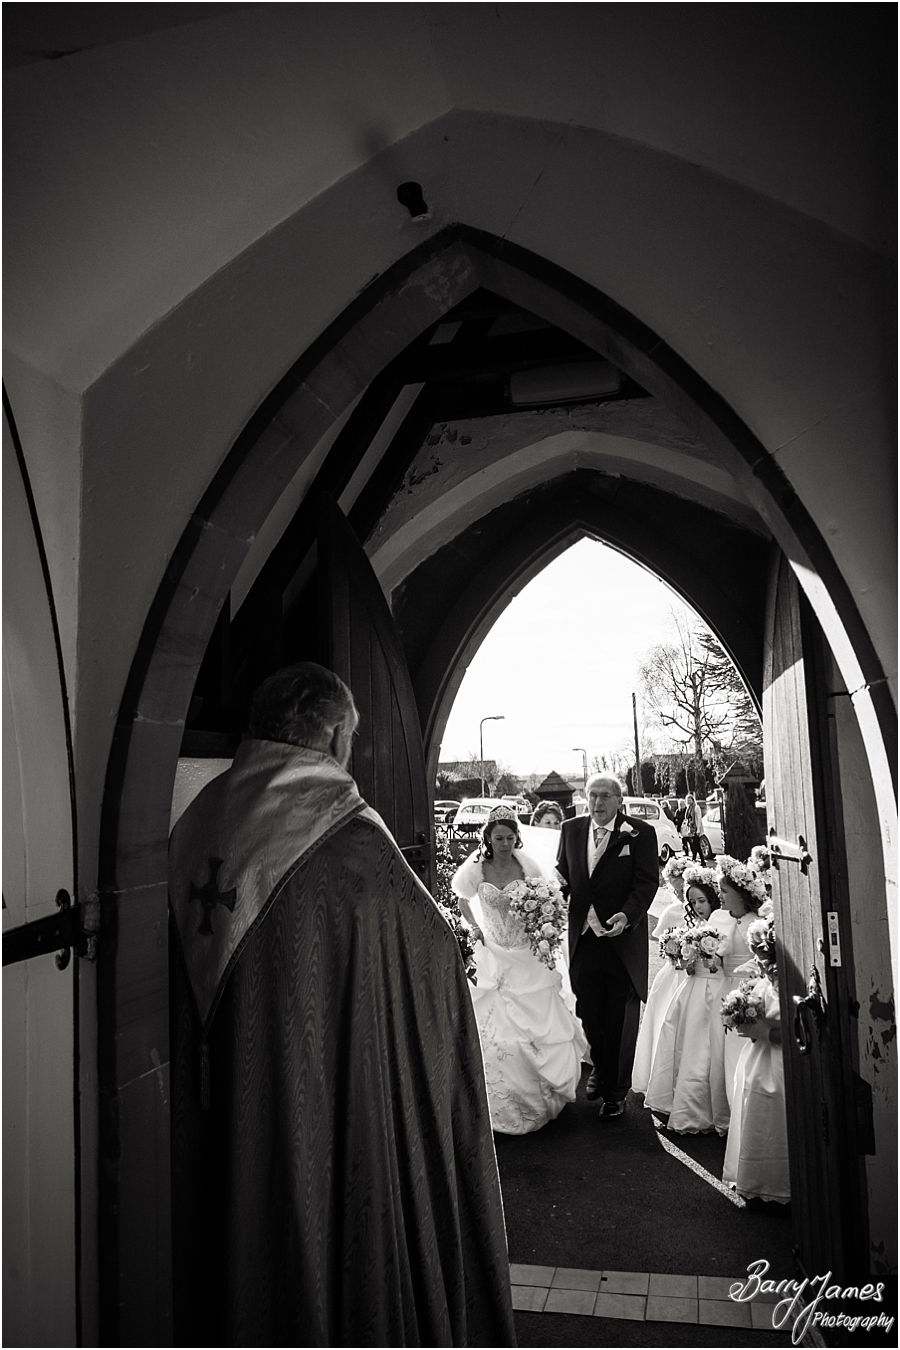 Reportage and creative wedding photography at St Pauls Church in Brewood by Stafford Wedding Photographers Barry James